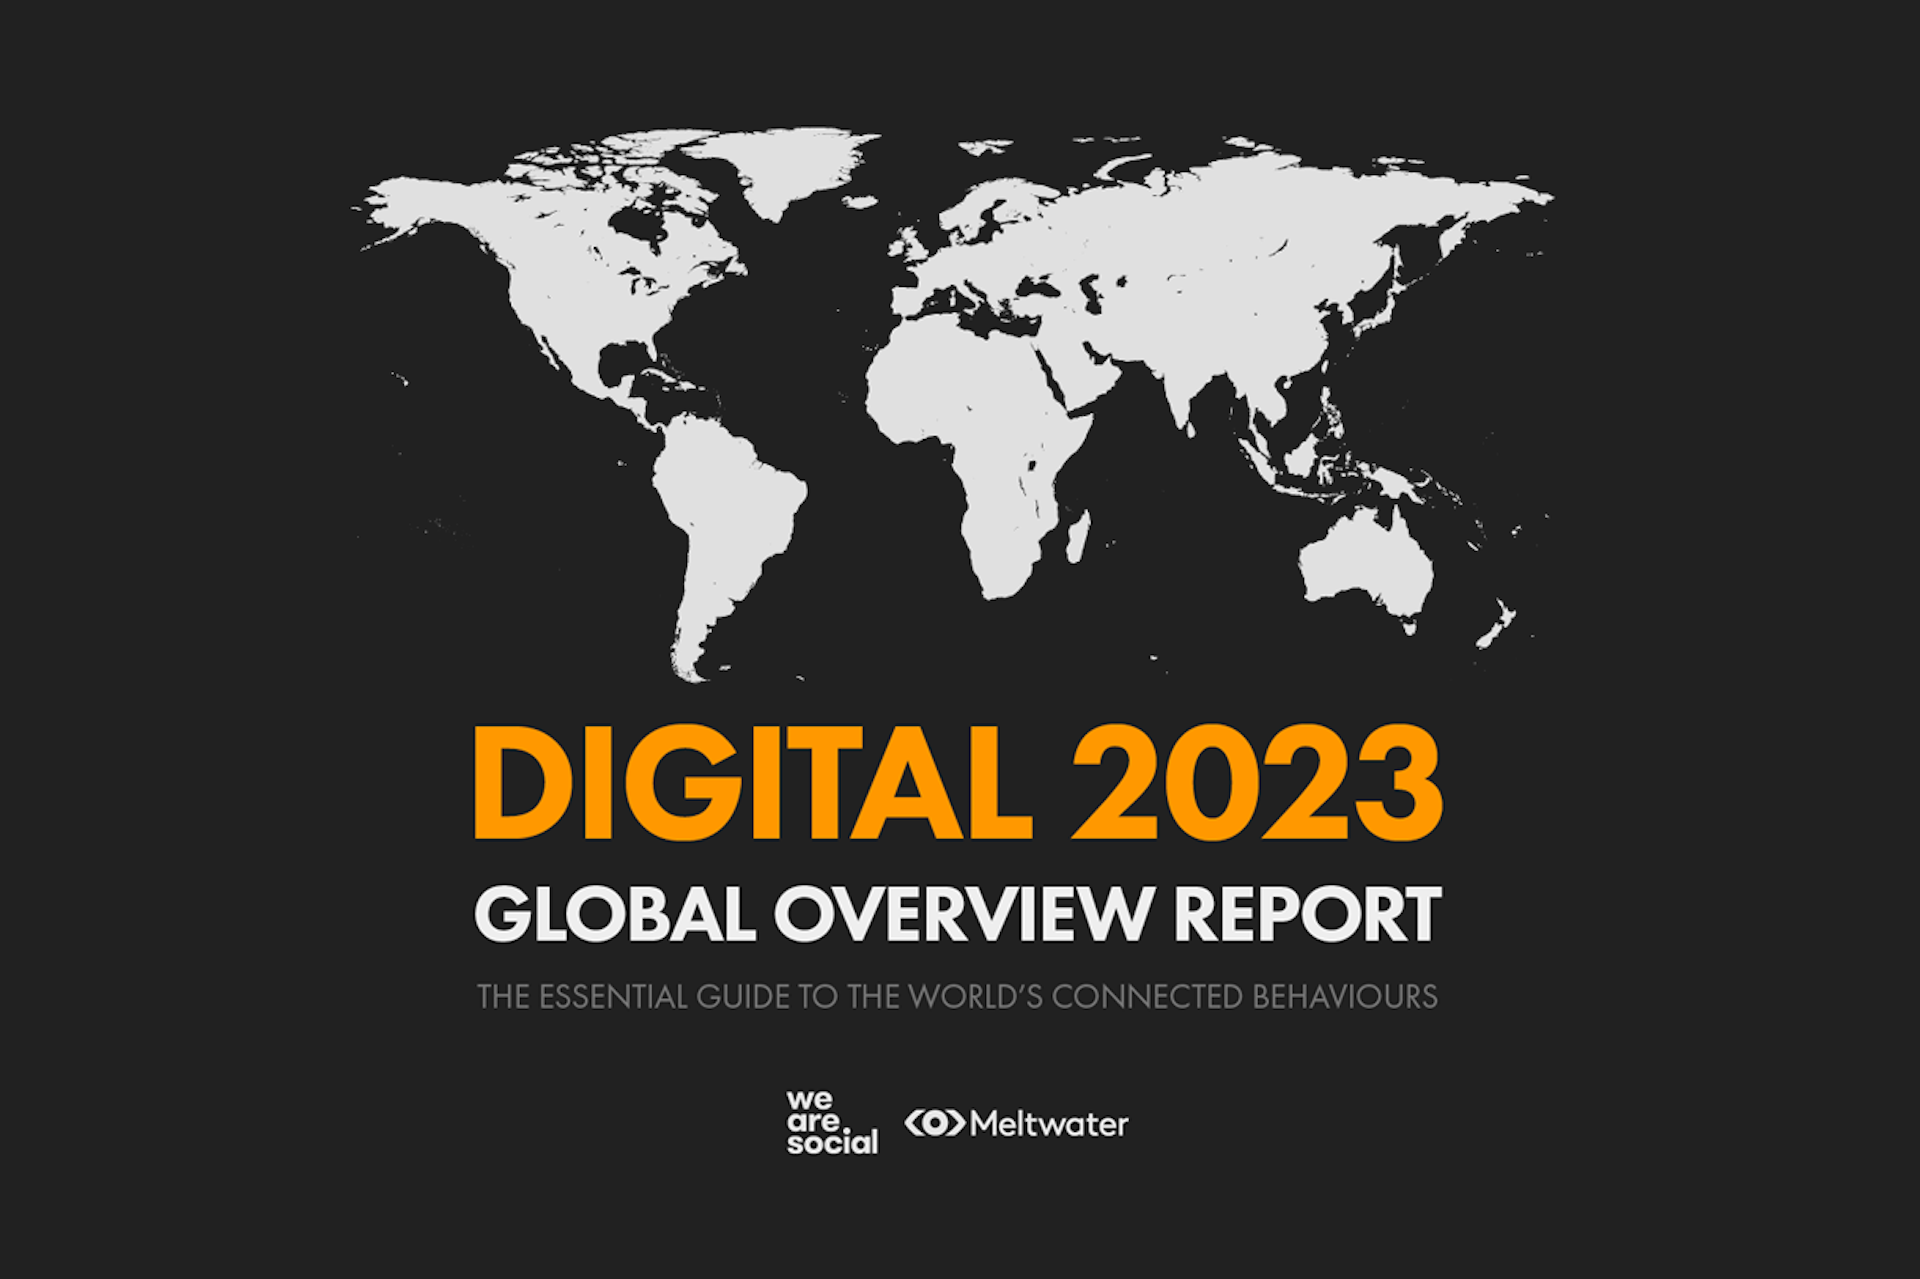 The cover image for the Digital 2023 Global Overview Report by Kepios and brought to you in partnership between Meltwater and We Are Social. The image features a map of the world and the title of the report. 